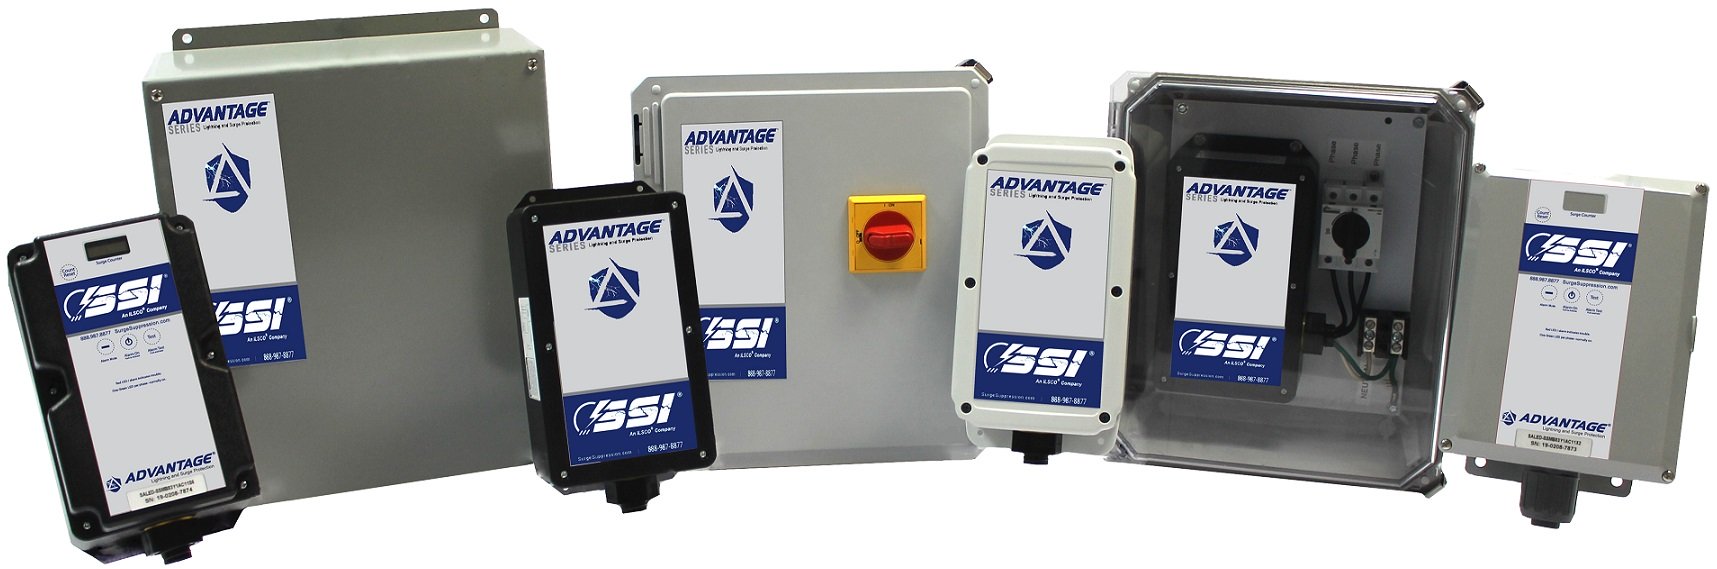 APS LLC | High Performance | Discrete All-Mode | Power Surge Protectors | Get the Right Gear!